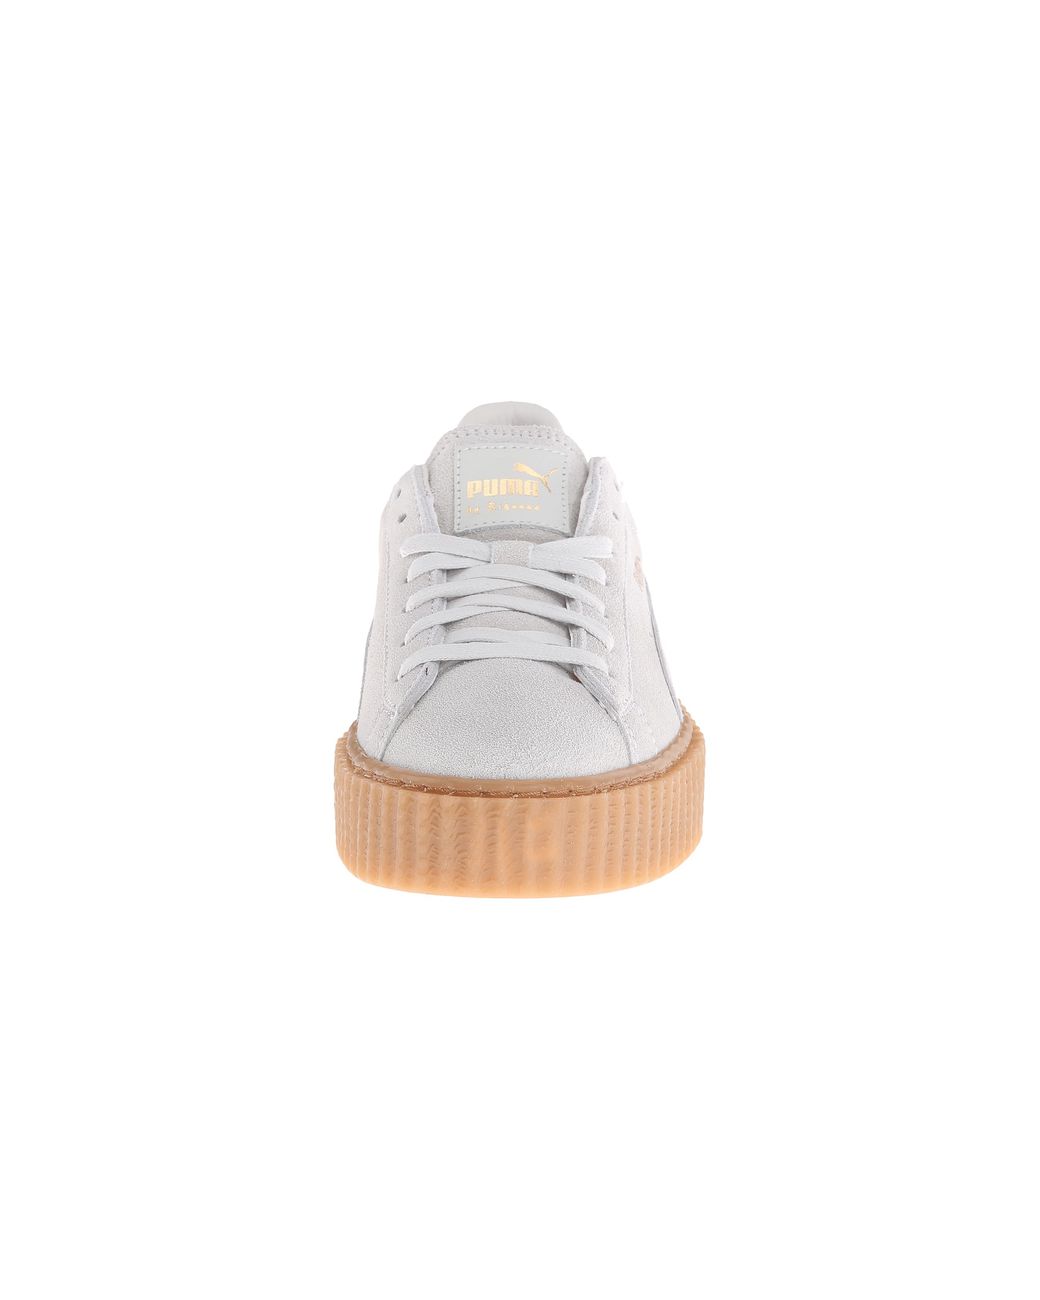 PUMA Rihanna X Suede Creepers in White | Lyst